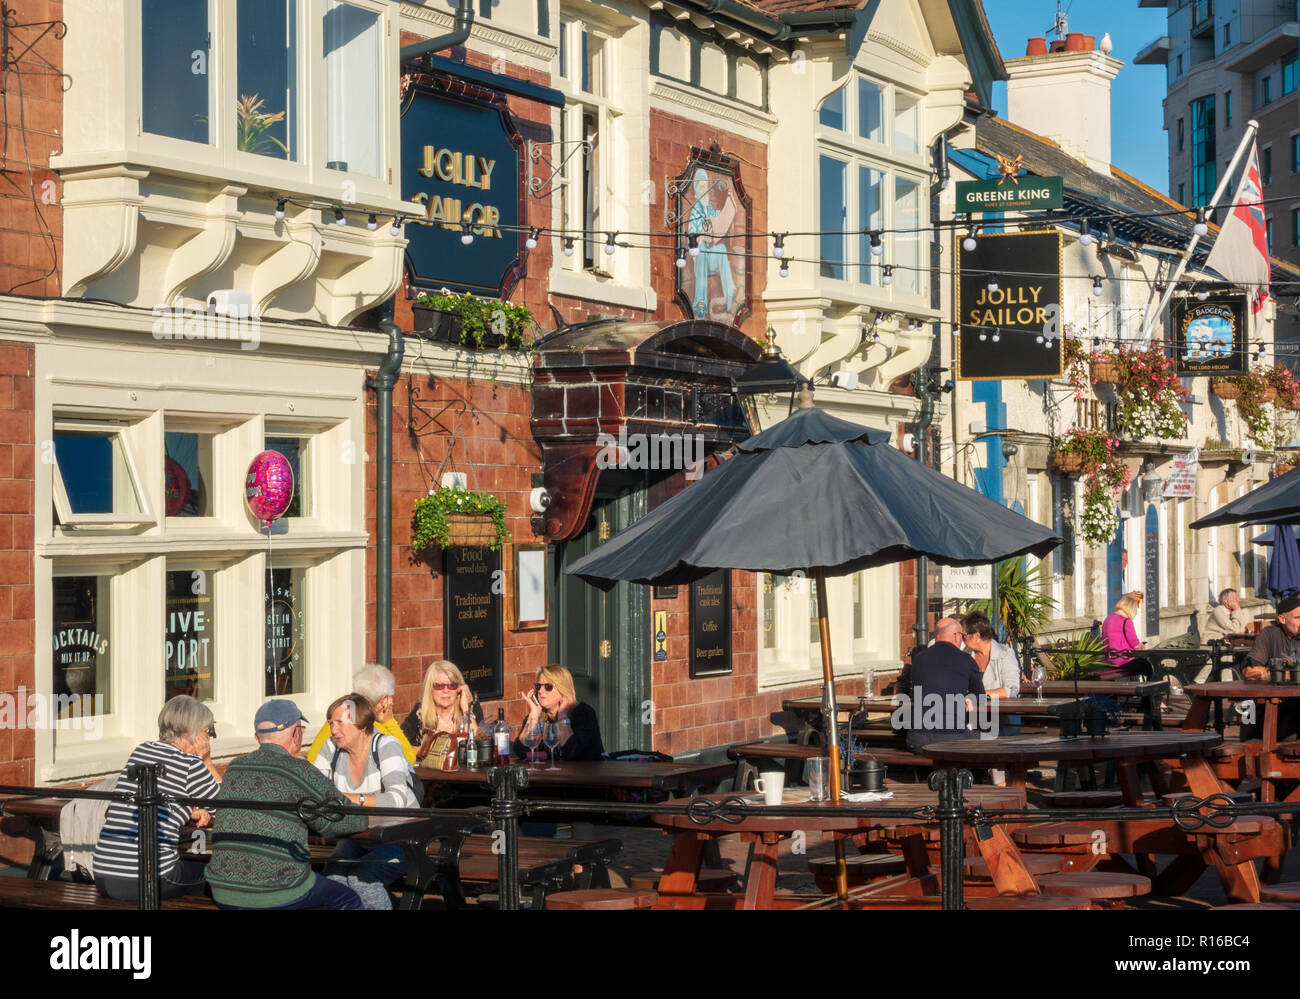 The Jolly Sailor and Lord Nelson pubs, Poole, Dorset, England Stock Photo